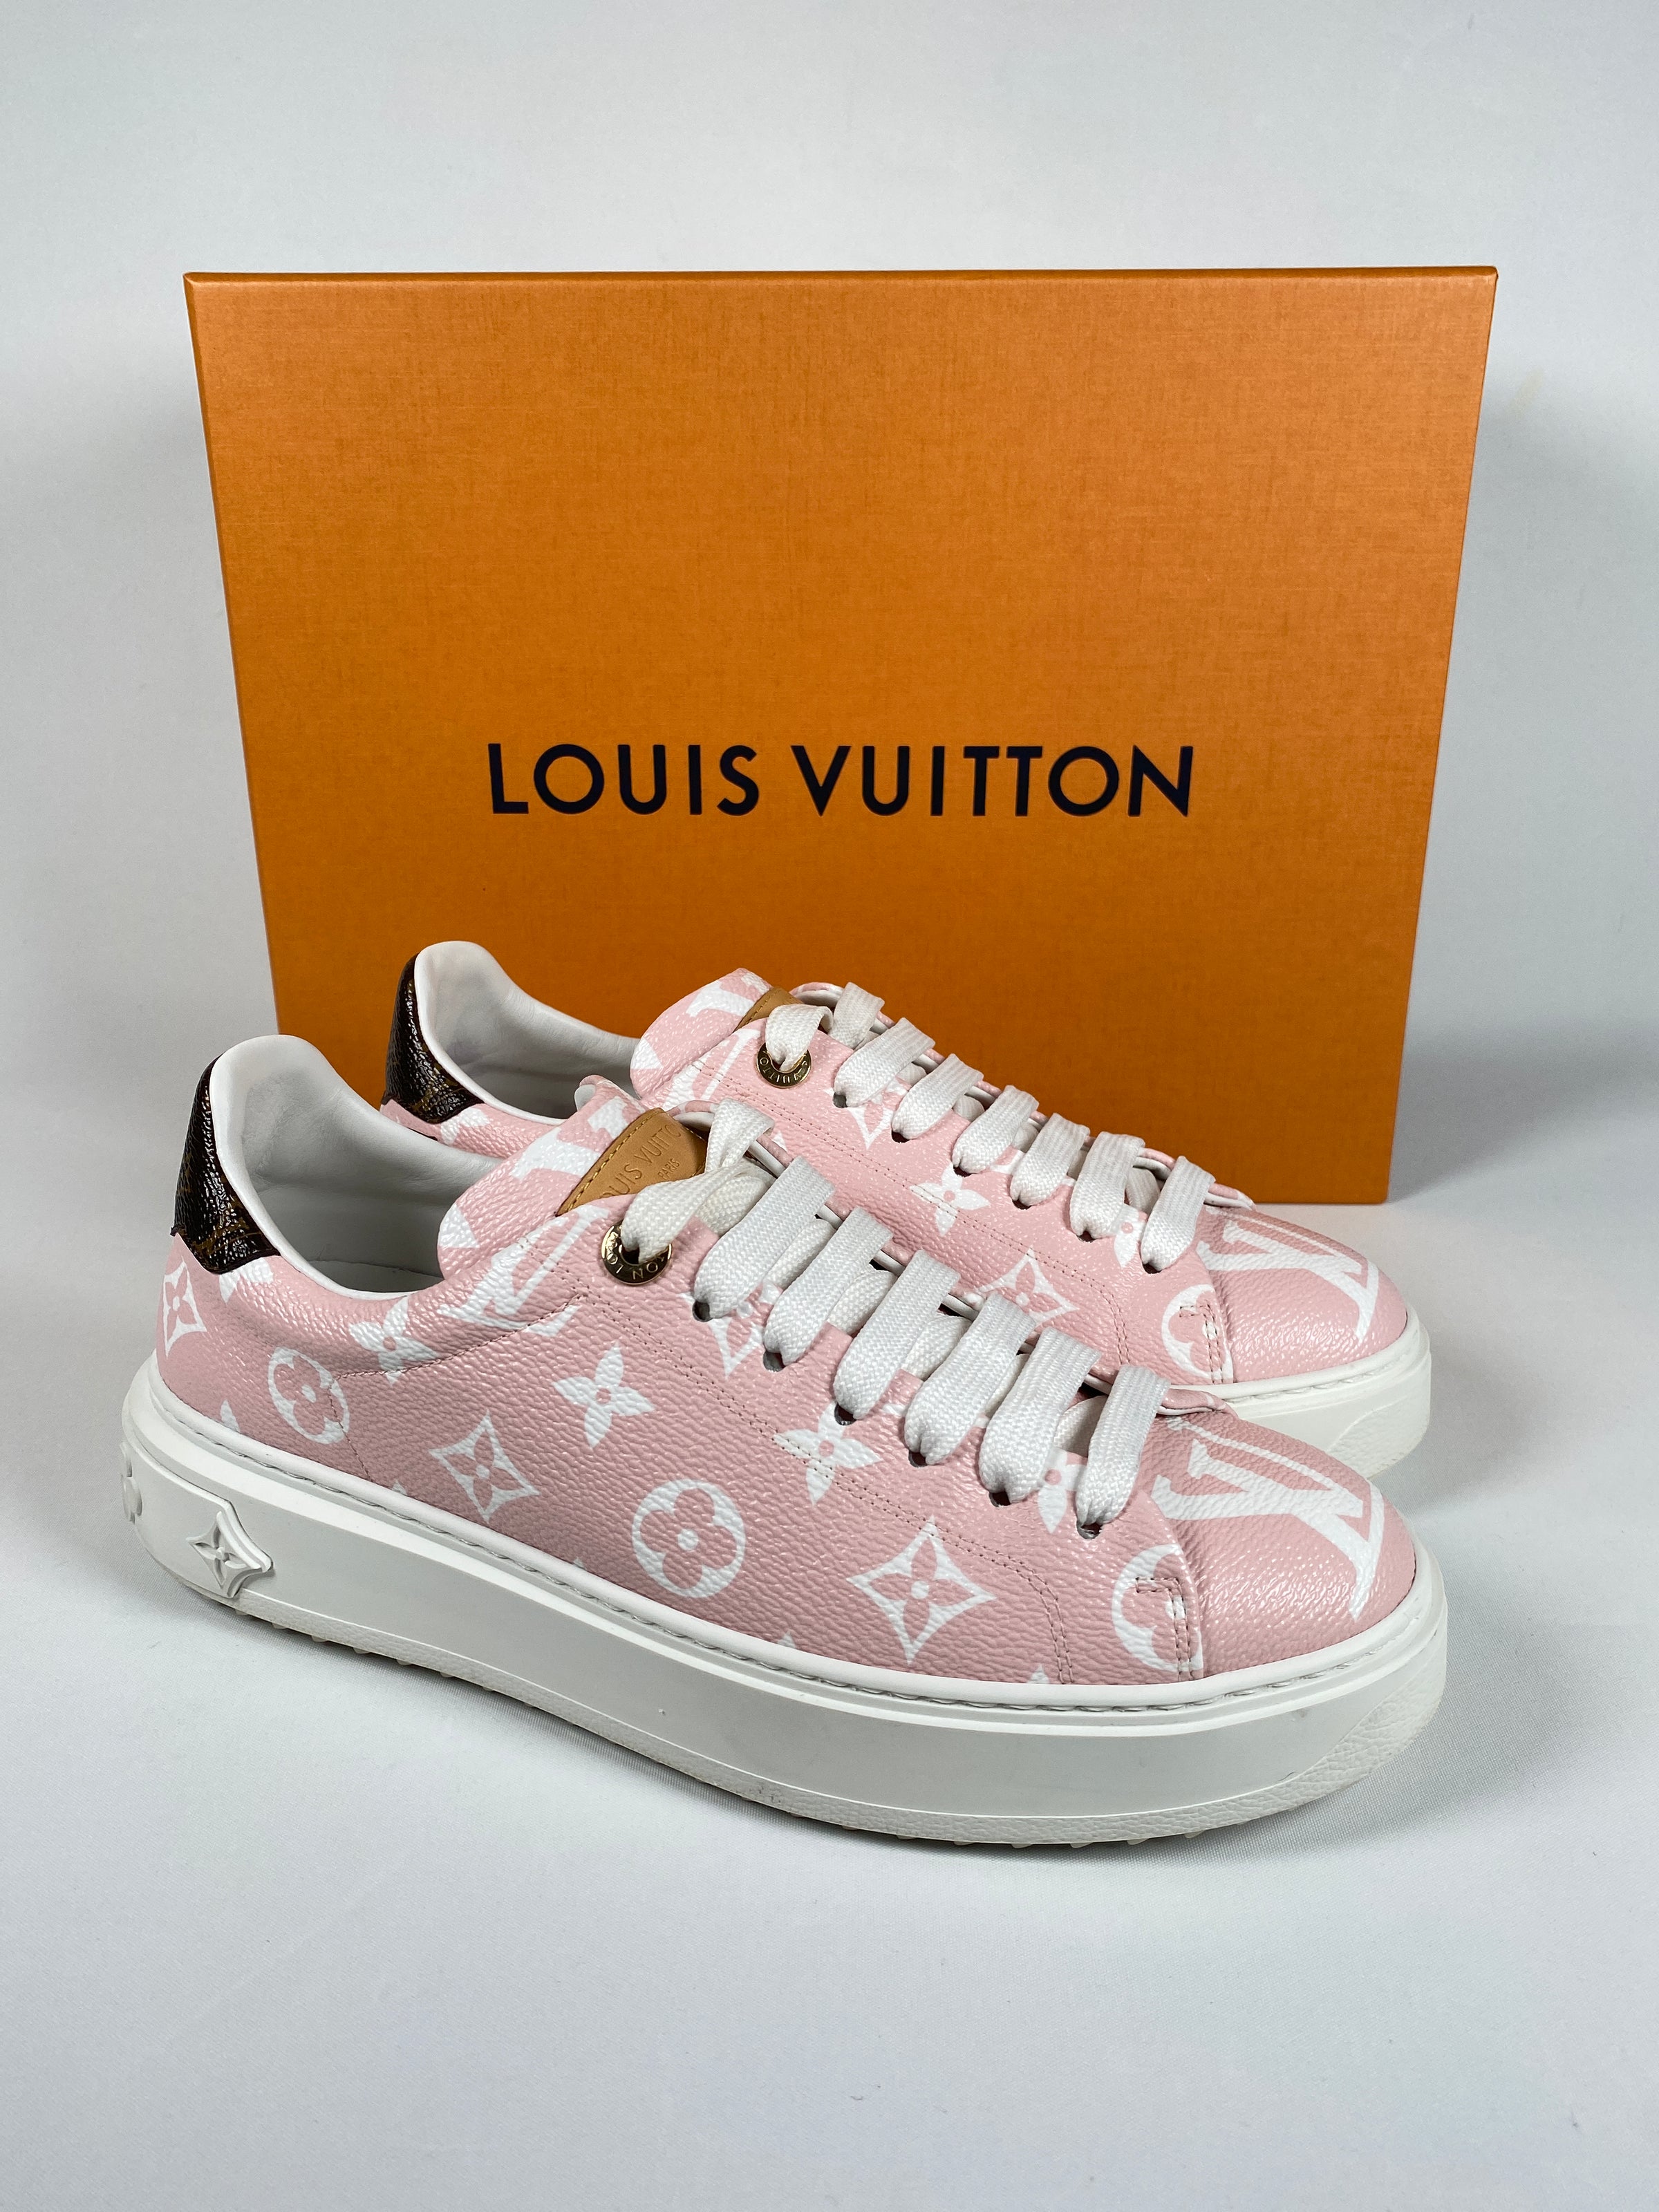 LOUIS VUITTON Monogram By The Pool Time Out Sneakers 38.5 Rose 802891